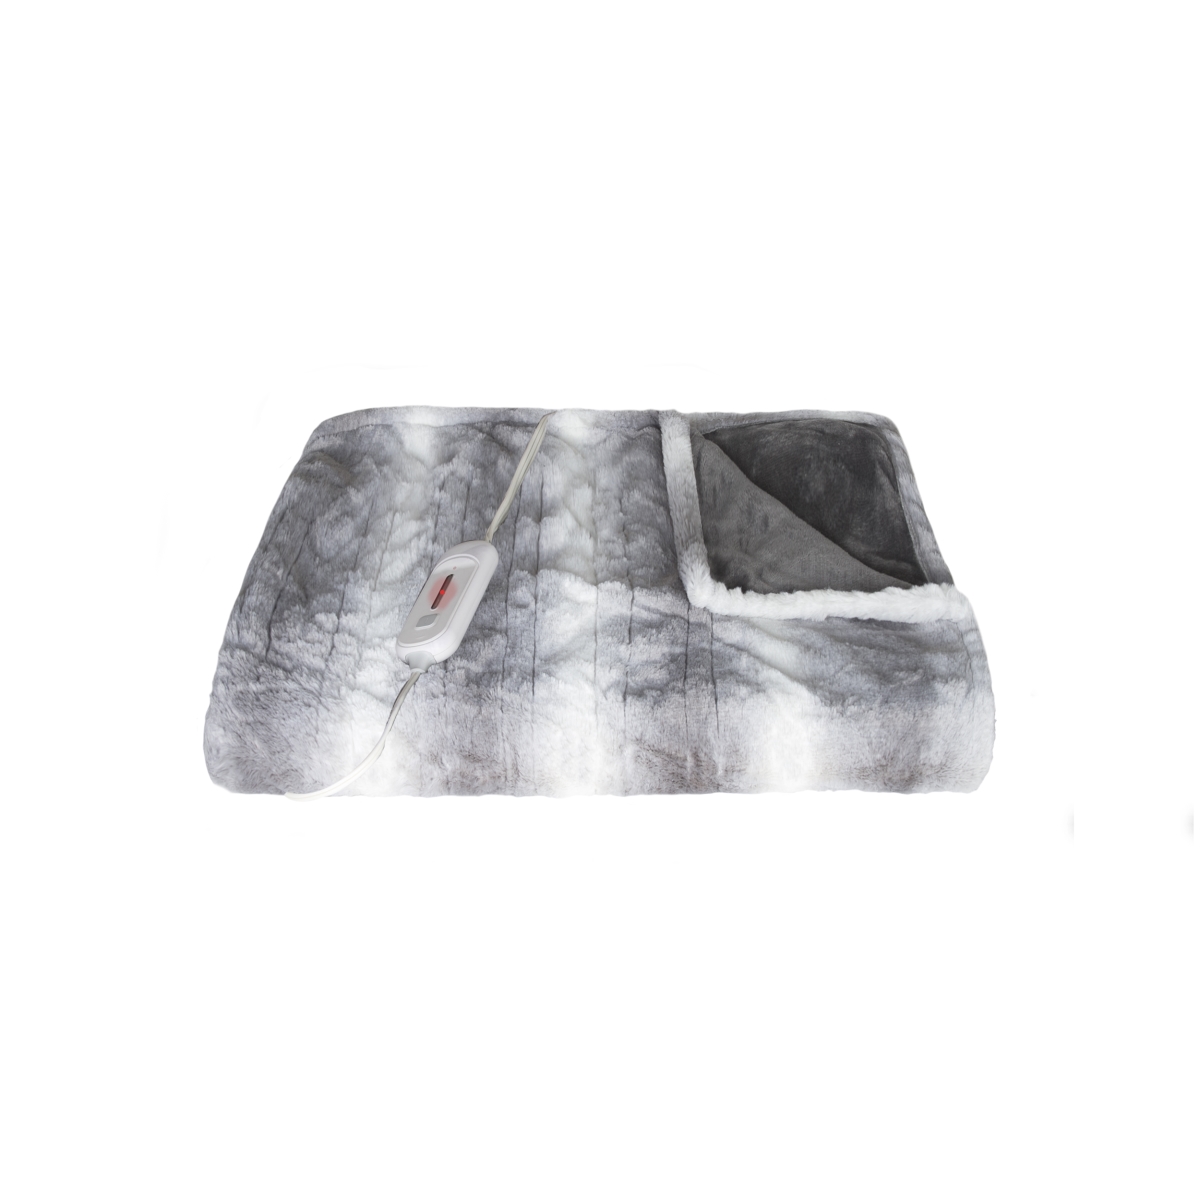 676685047687 50 X 60 In. Heated Throw Blanket - Grey & White